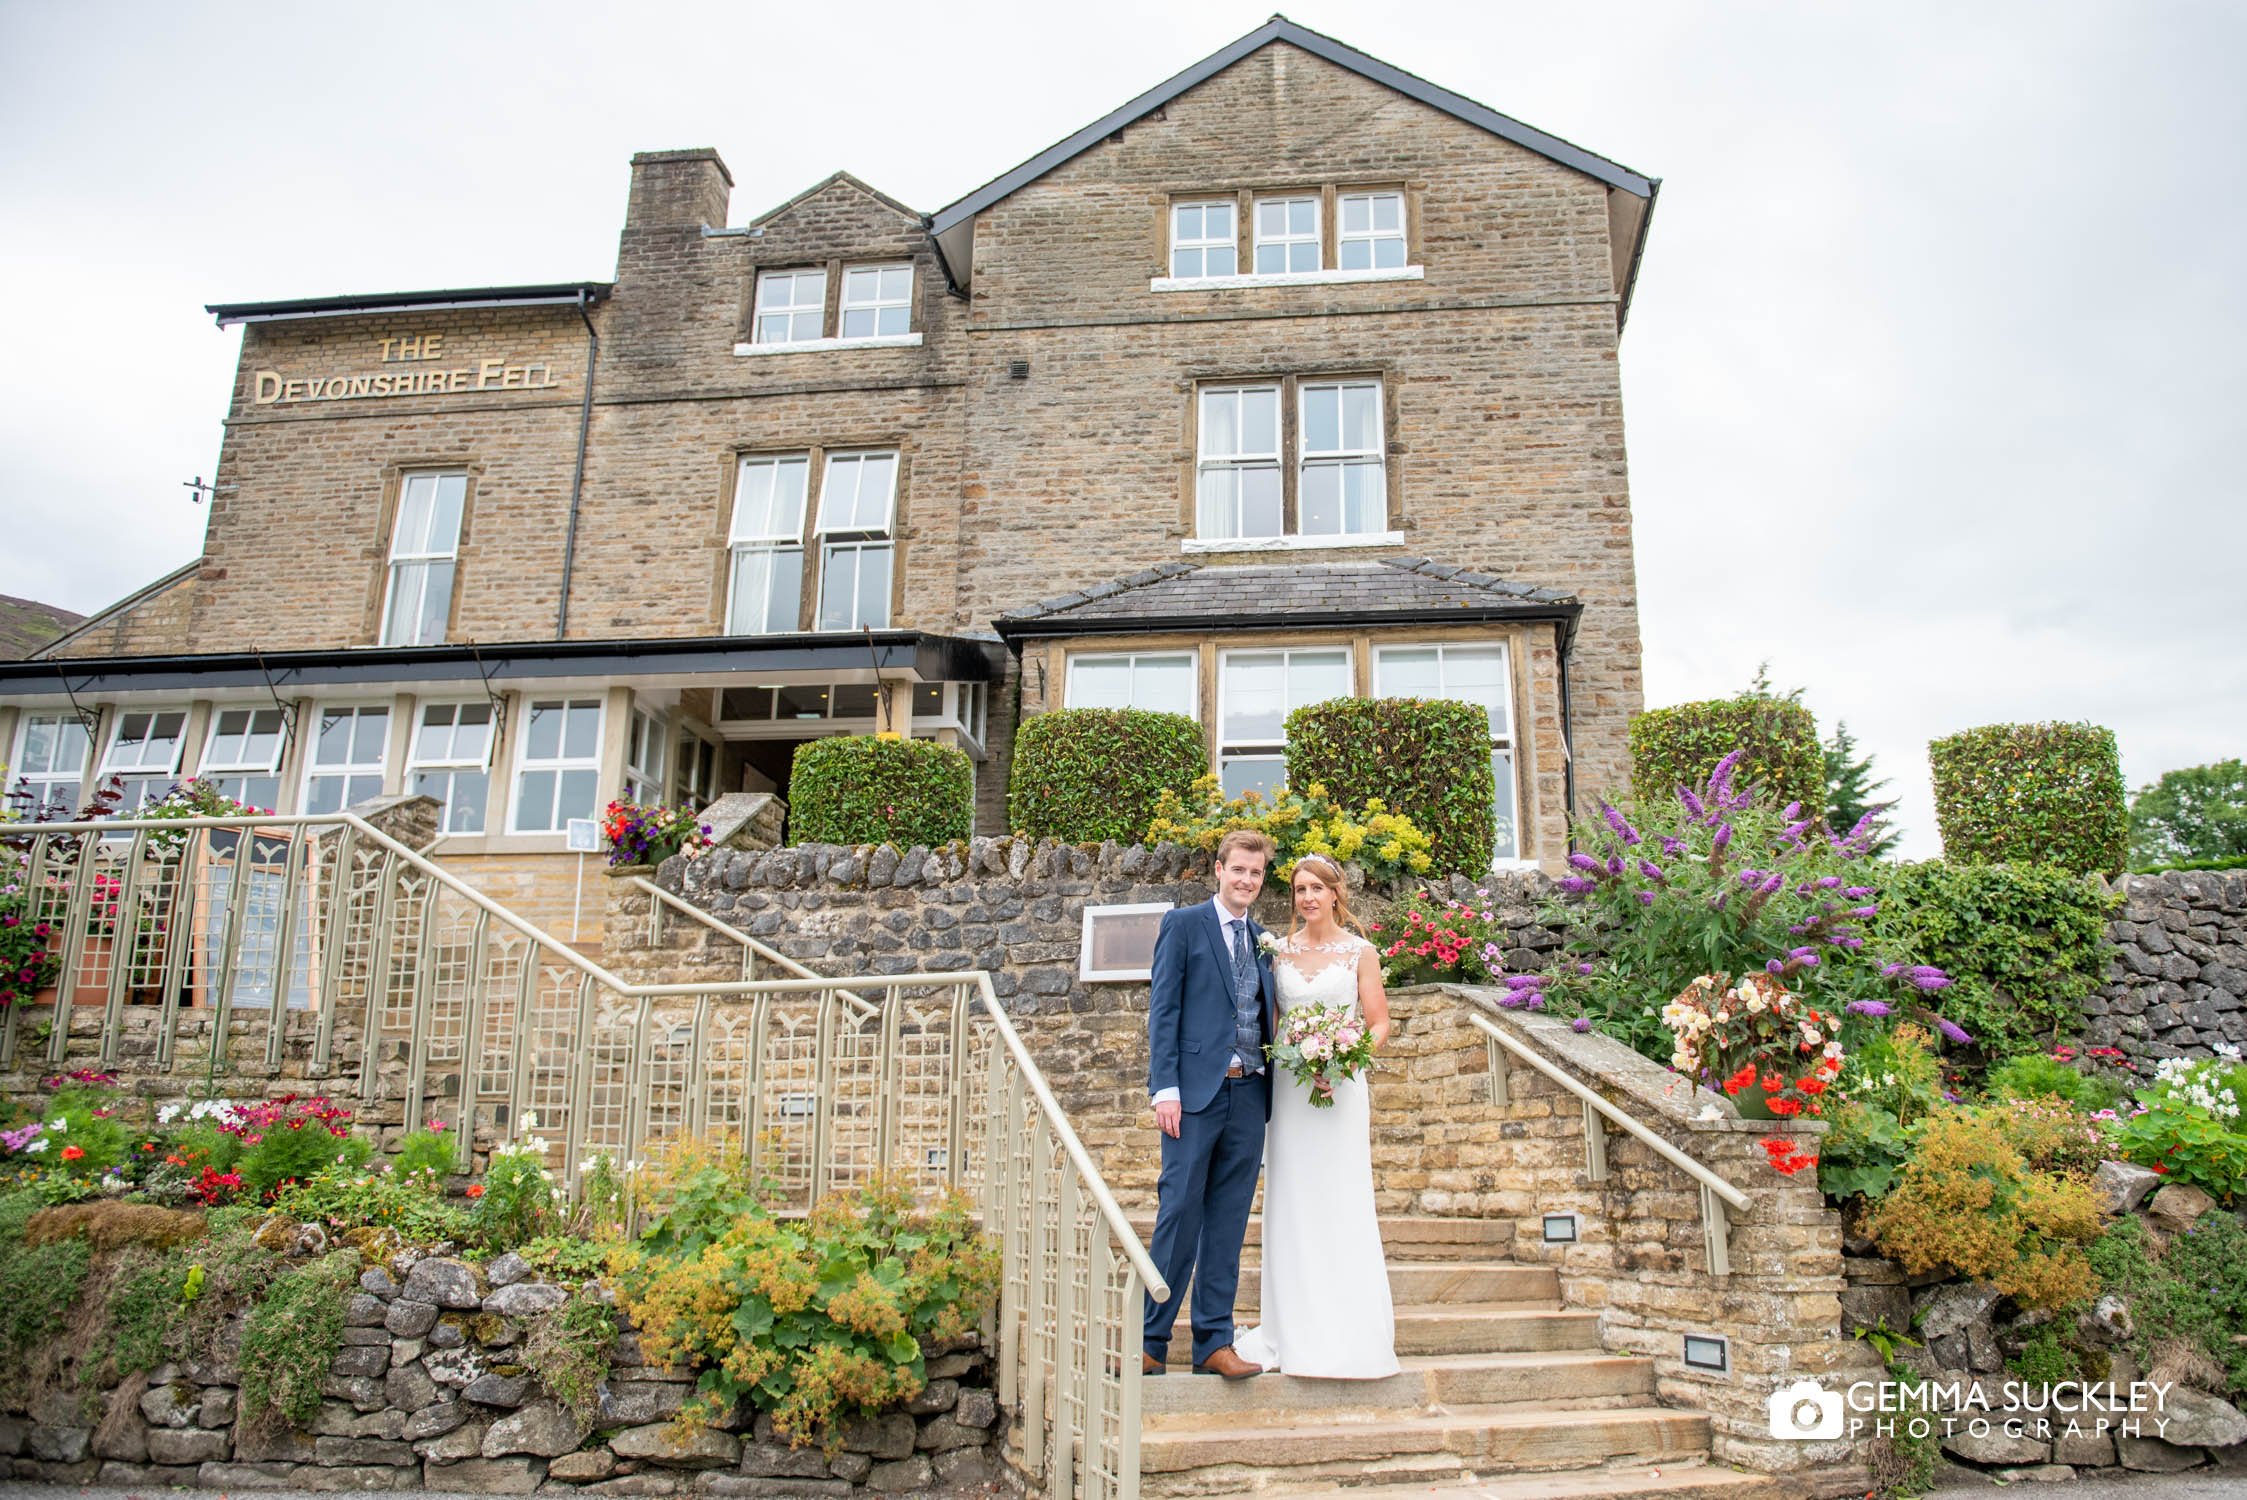 just married couple at the devonshire fell hotel